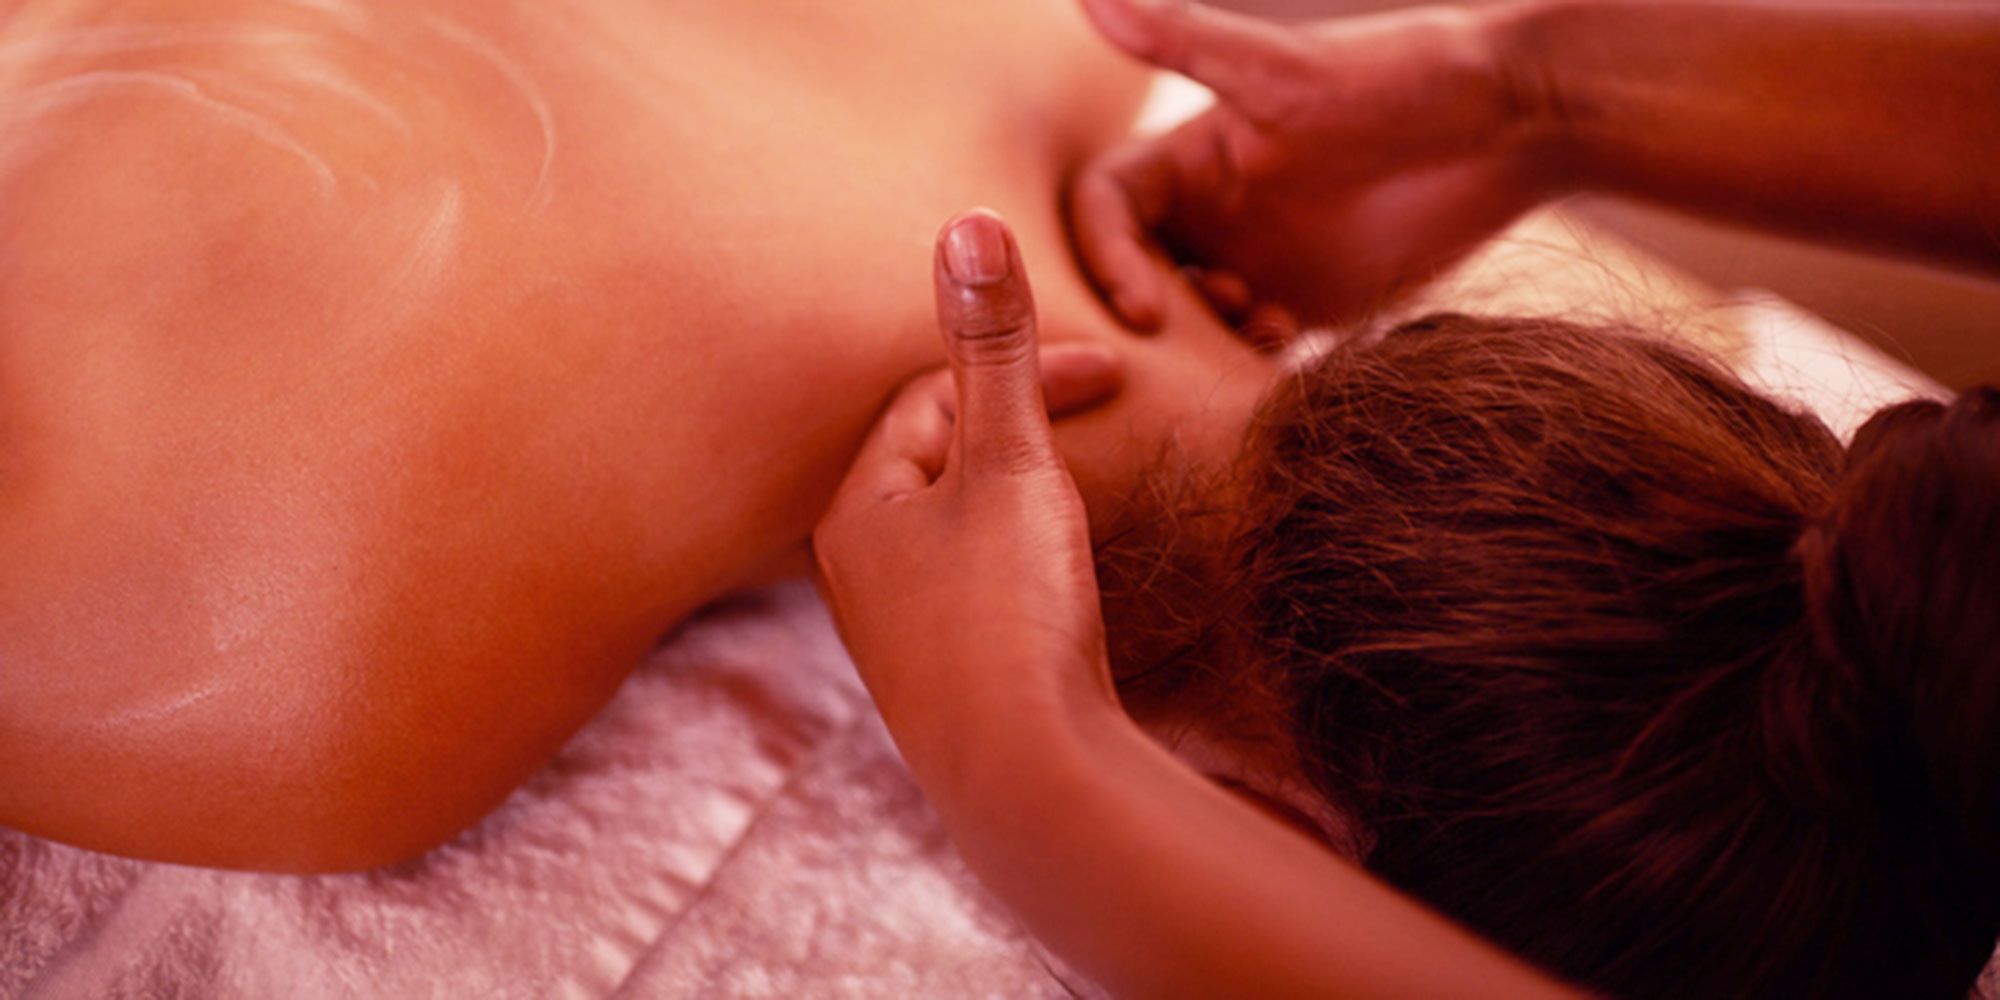 Orgasmic massage stories from women who pay a stranger image